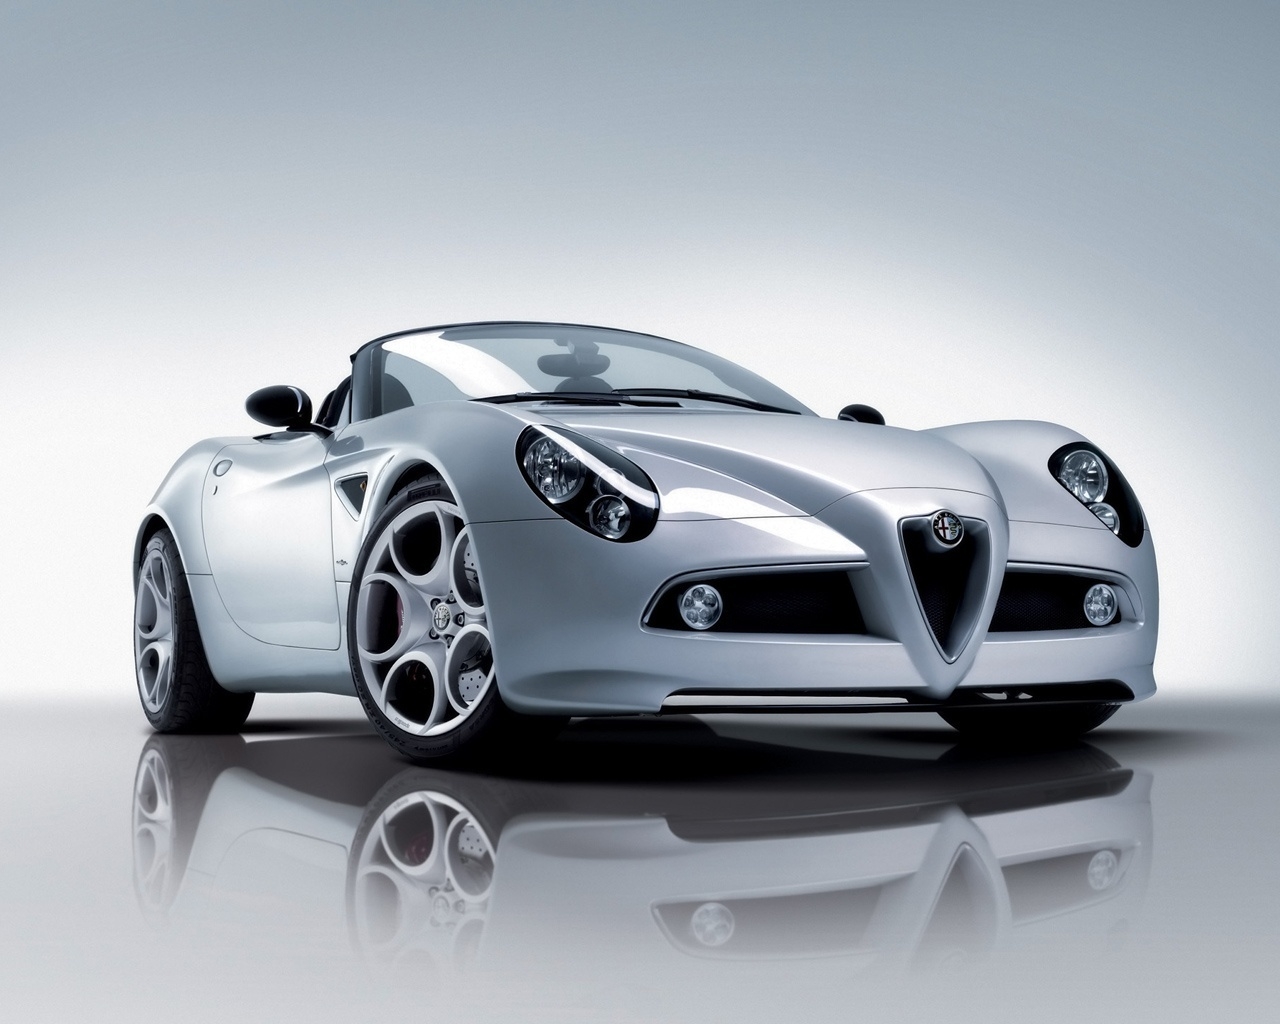 Alfa Romeo 8C Spider Front for 1280 x 1024 resolution